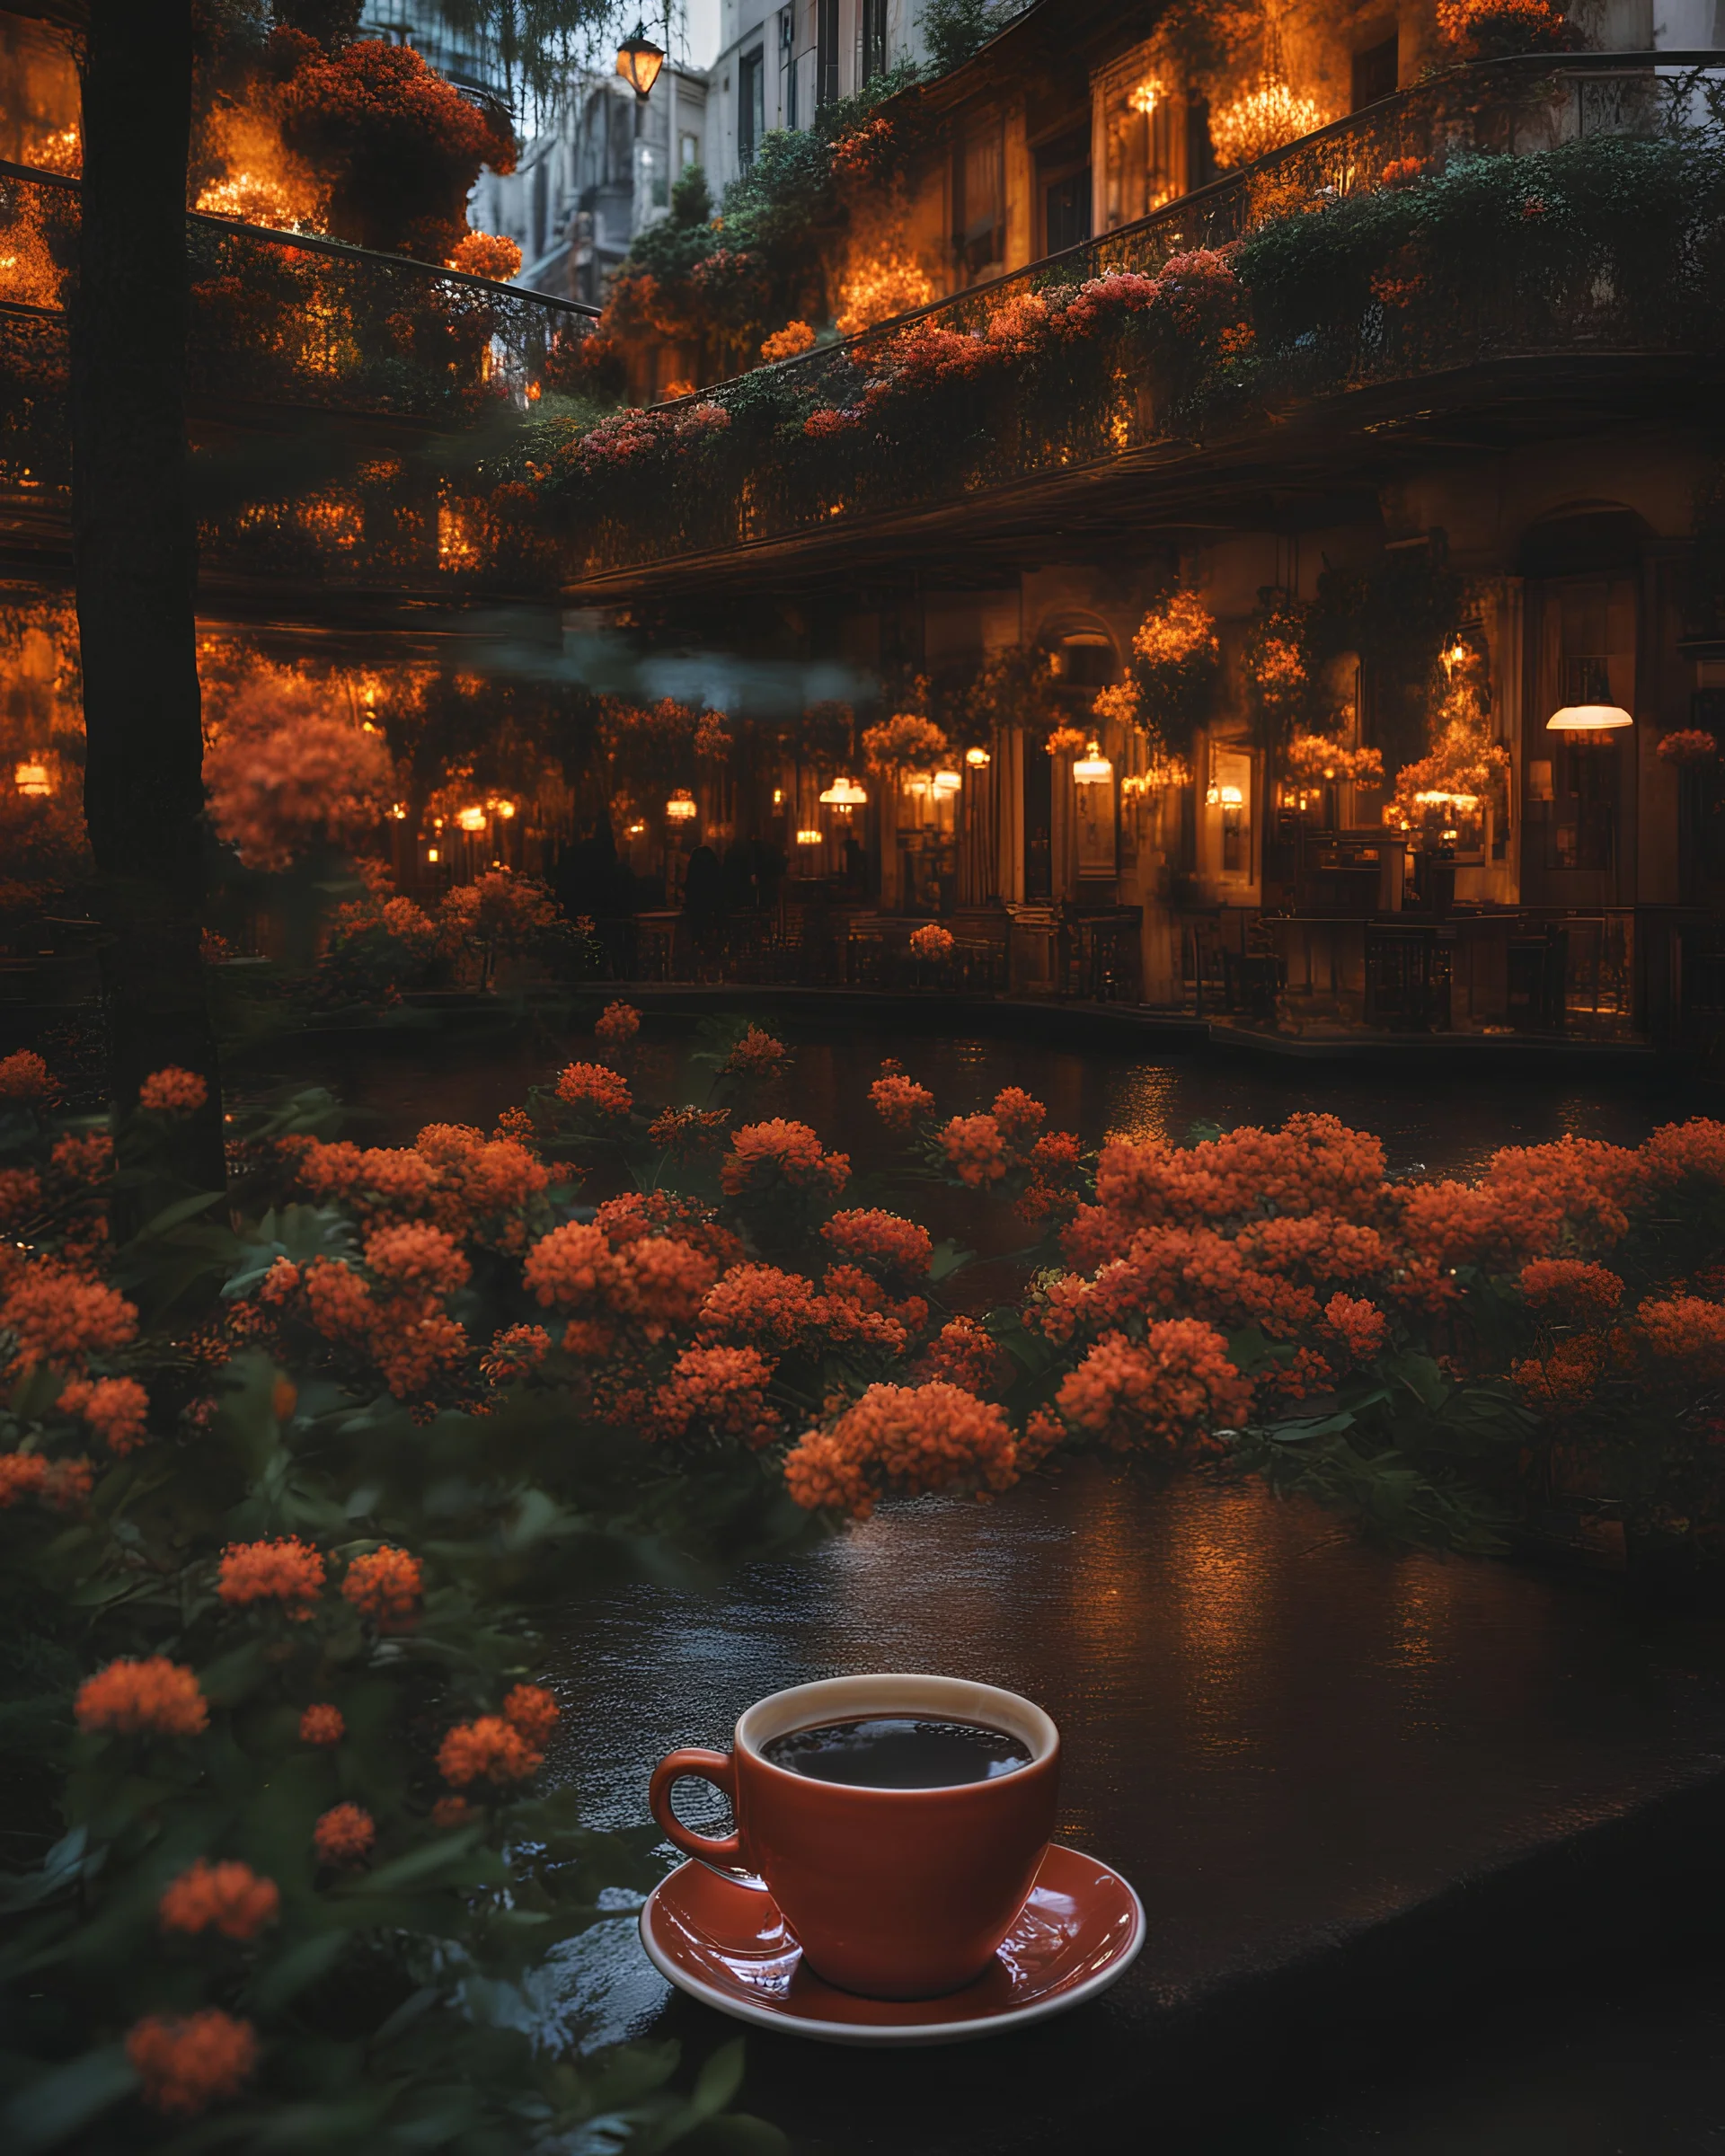 In all the purity of the city, coffee drips, the overflowing color of the moments, is in its bud, as if it were a fire between the waist of the evening and the air of pine, it smells from the feet to the feet. Time is flowing inside every part.